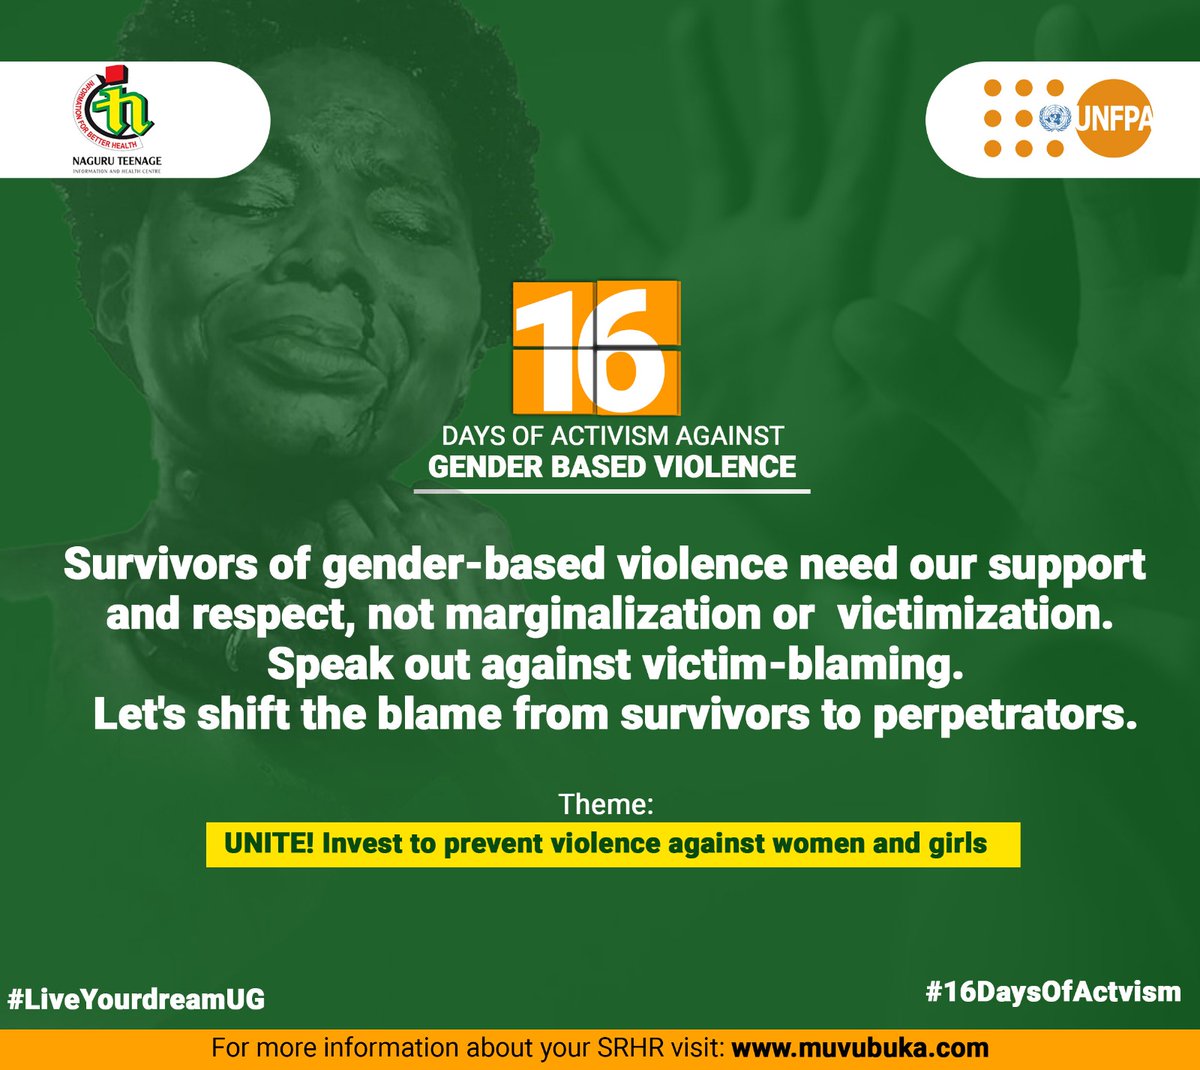 Given that GBV survivors often experience severe emotional and psychological trauma, mental health, psychosocial needs are strongly linked to GBV.

Meeting these needs is essential to rebuild their lives and break the cycle of violence.
#16DaysOfActivism #LiveYourDreamUG